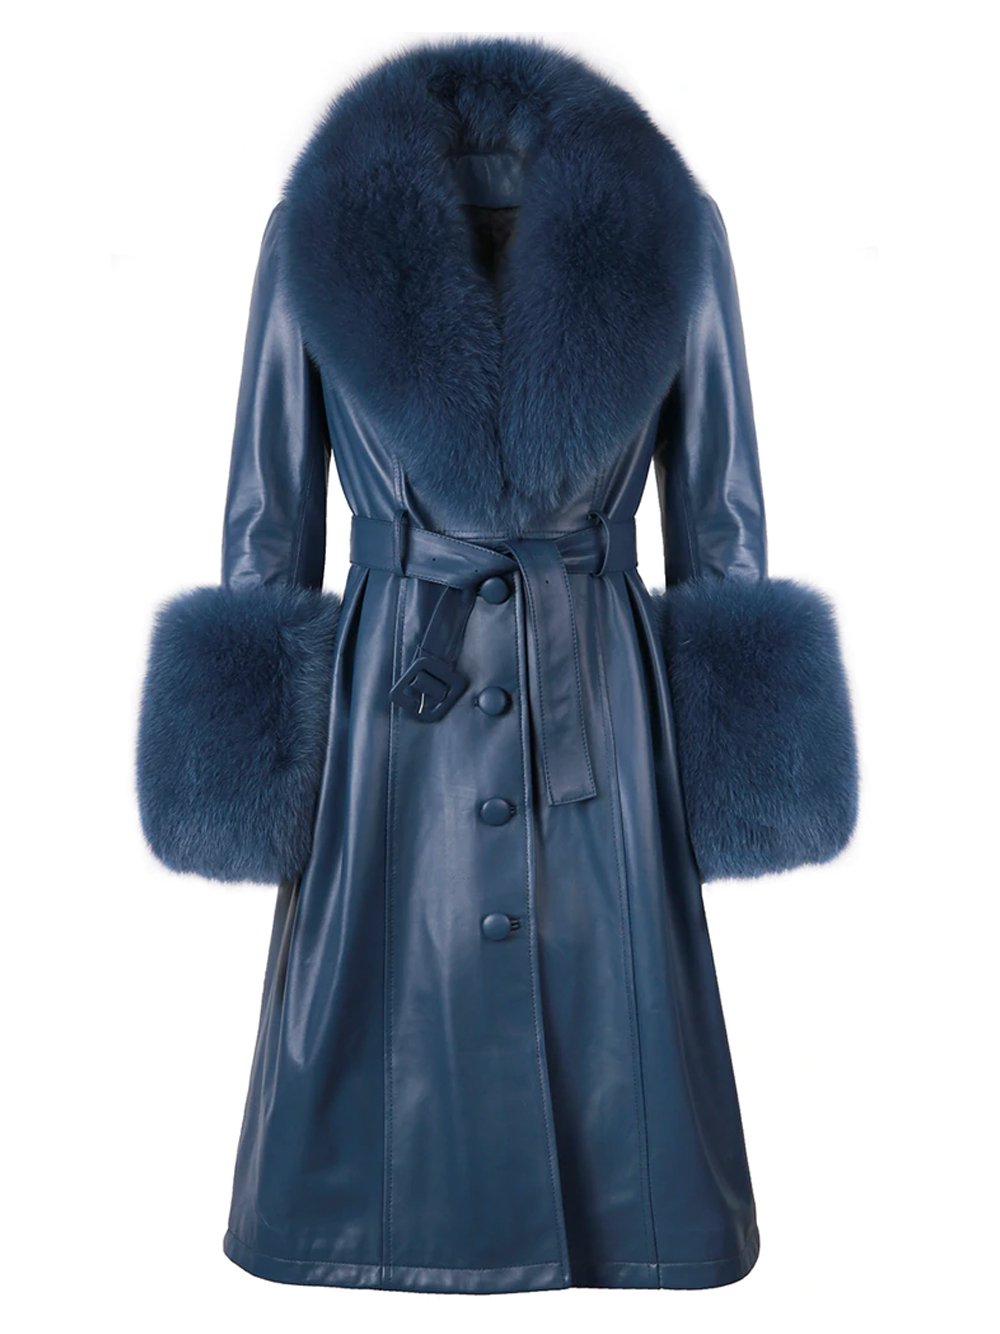 Faux Fur Genuine Leather Coat in Navy